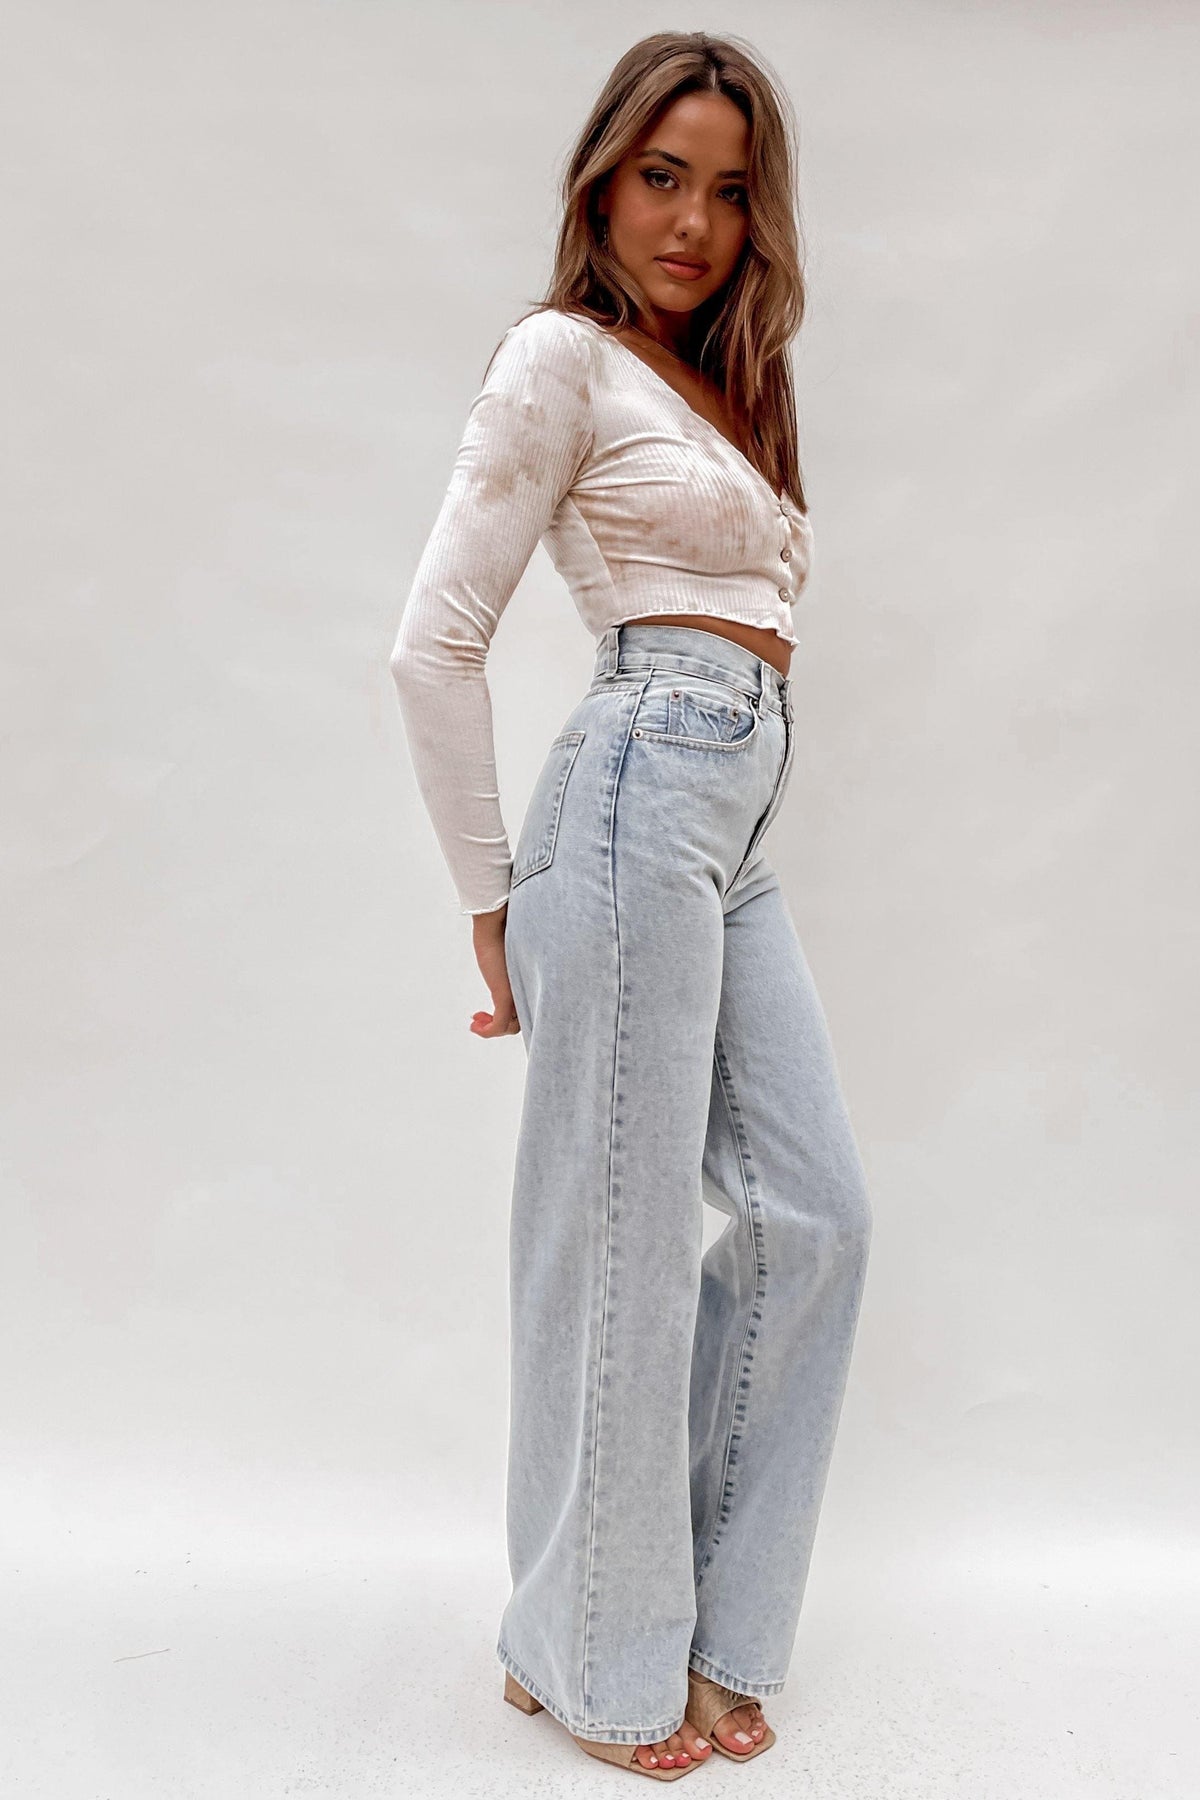 Escape The Crowd Top, BASIC TOPS, BEIGE, CROP TOPS, LONG SLEEVE, POLYESTER AND COTTON AND SPANDEX, Sale, TOP, TOPS, WHITE, Our New Escape The Crowd Top Is Now Only $41.00 Exclusive At Mishkah, Our New Escape The Crowd Top is now only $41.00-We Have The Latest Women&#39;s Tops @ Mishkah Online Fashion Boutique-MISHKAH